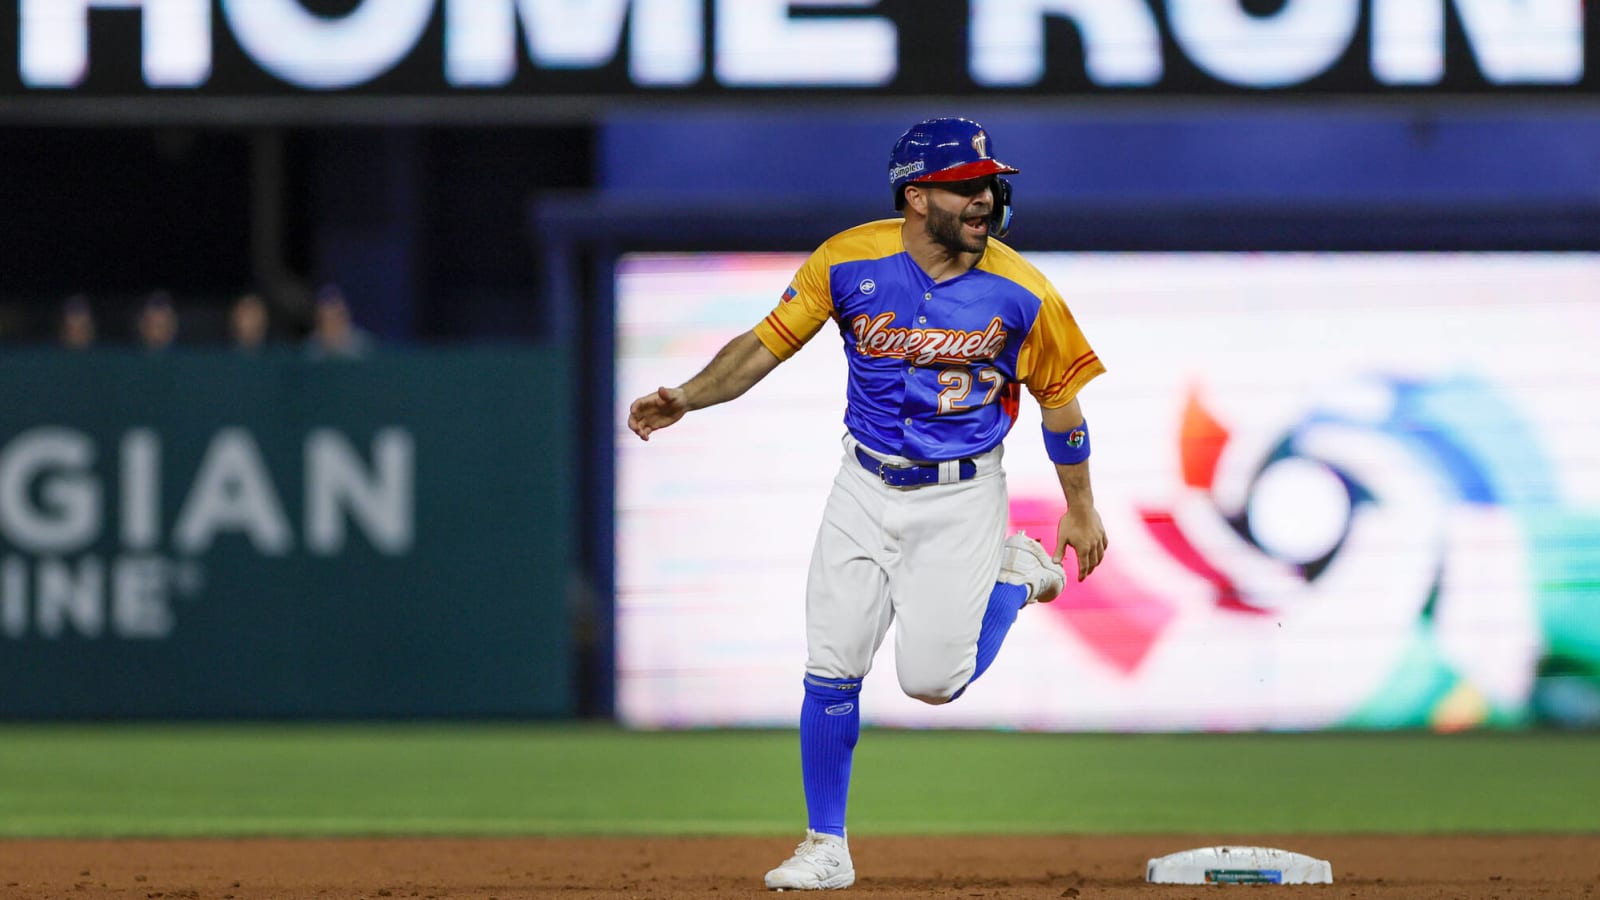 Watch: Jose Altuve exits WBC contest against US after being hit by pitch